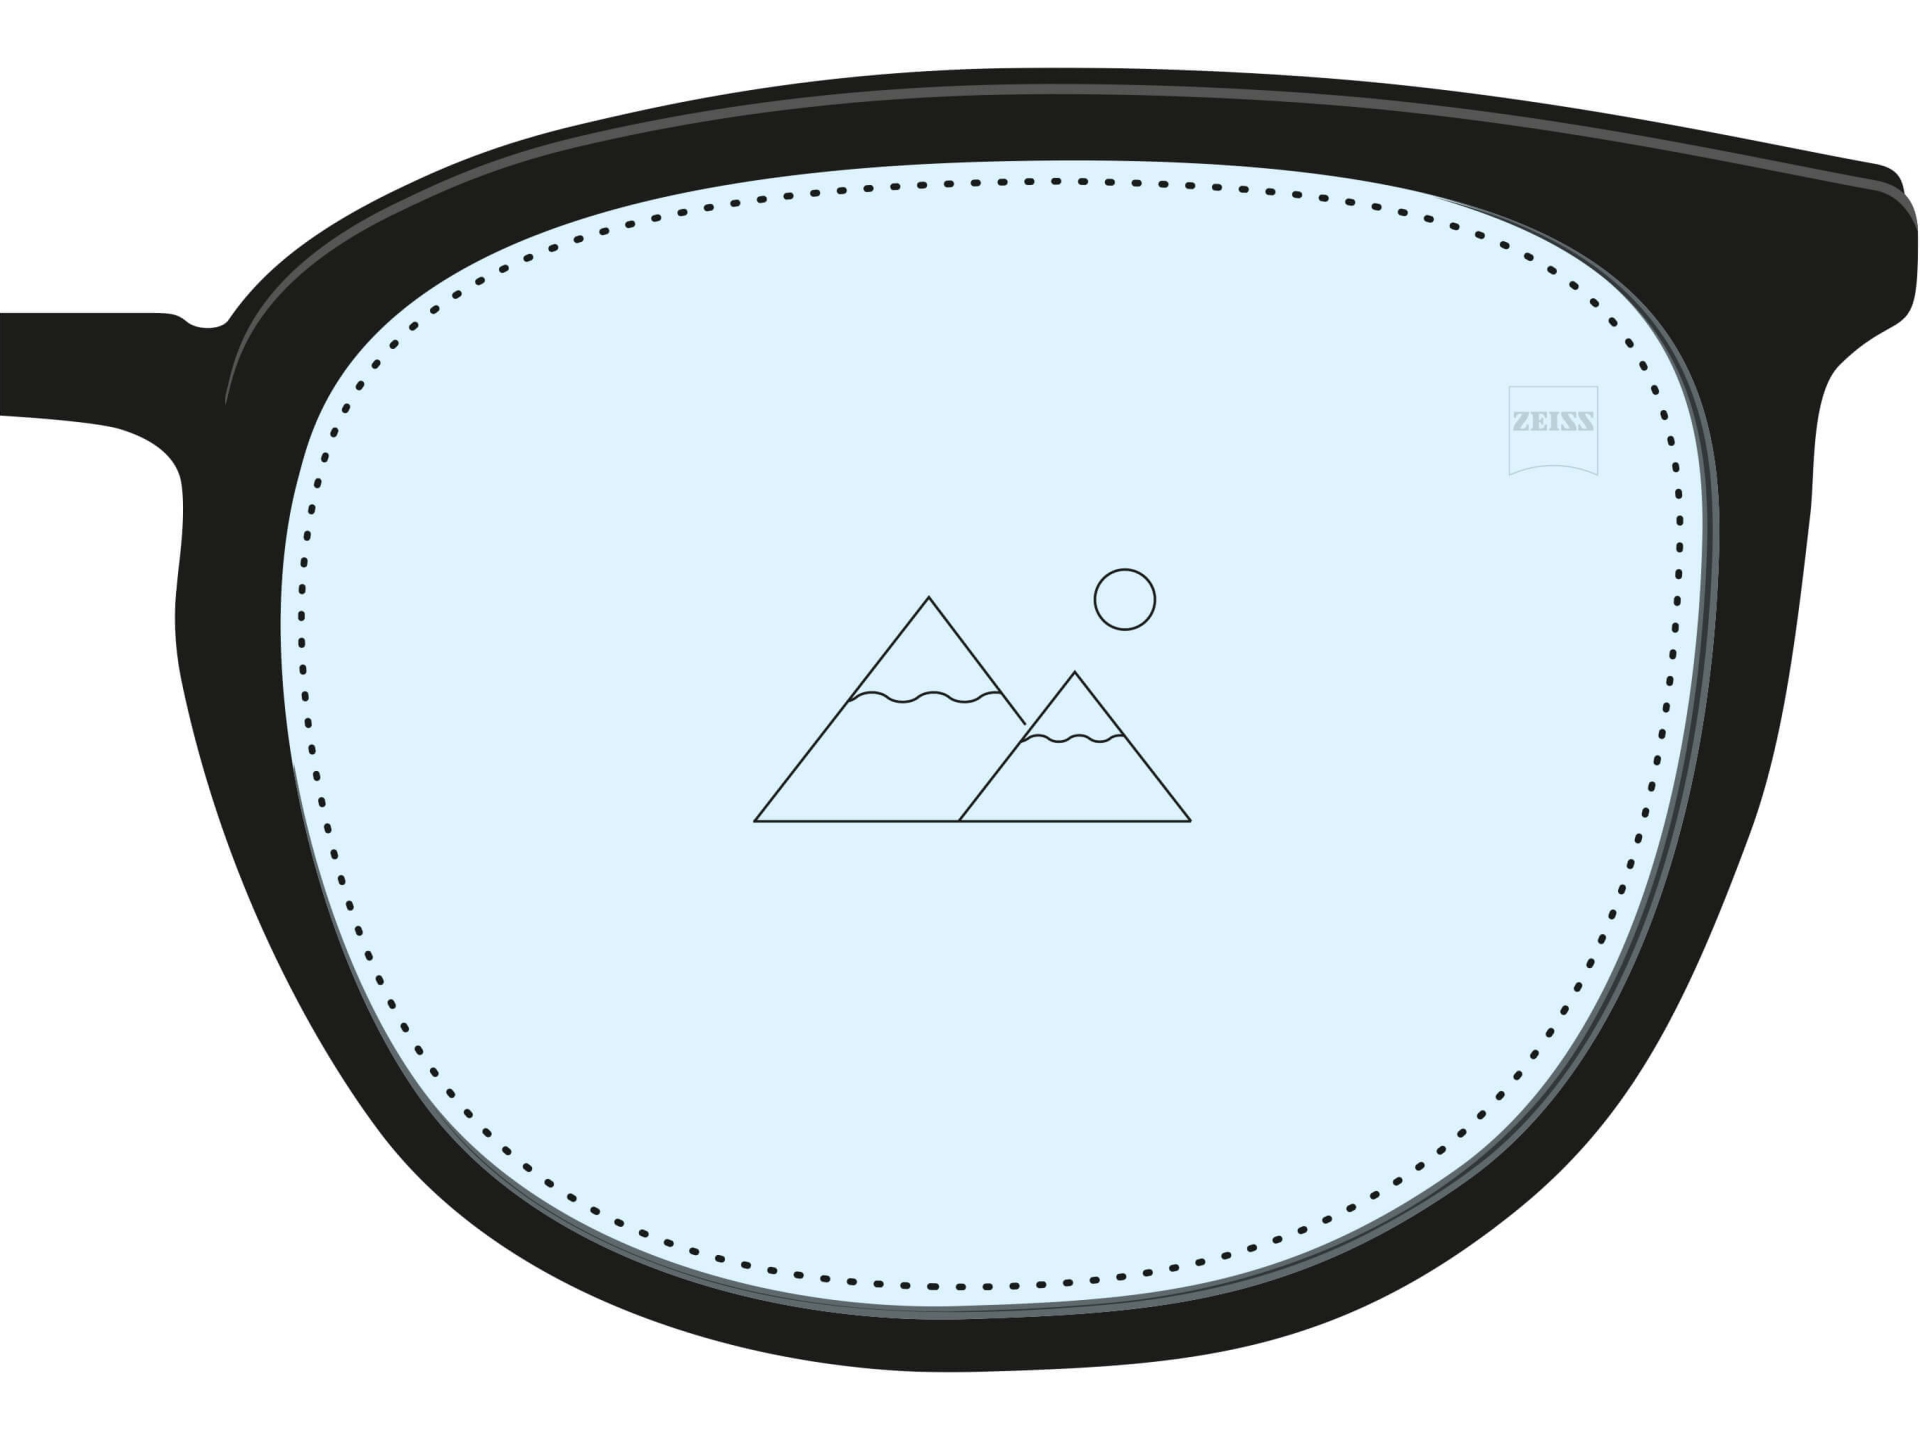 An illustration of a single vision lens. It is filled with a light blue colour throughout with and a single icon shows that it has only one prescription for one distance.